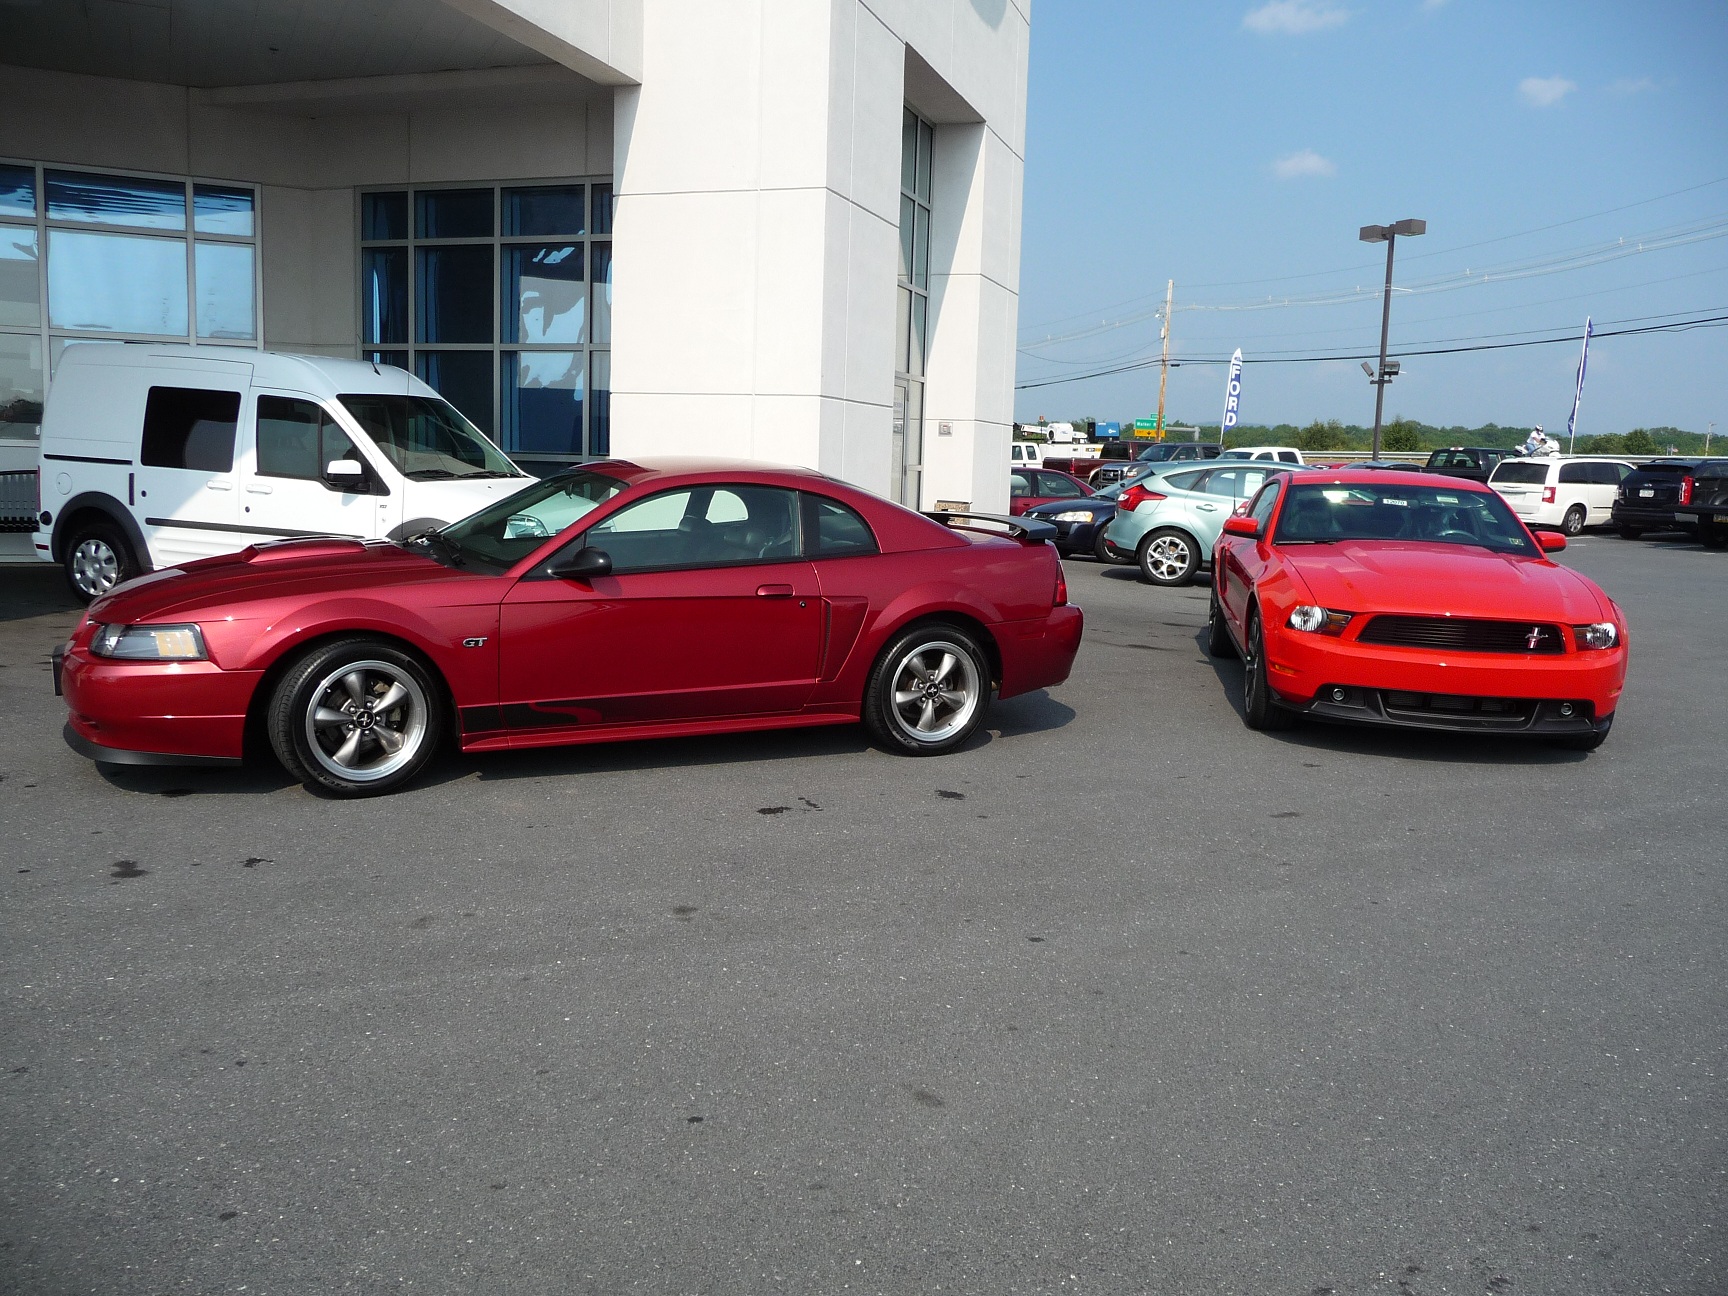 Ark Ligegyldighed Udholdenhed Race Red vs Red Candy - Any photos? - The Mustang Source - Ford Mustang  Forums